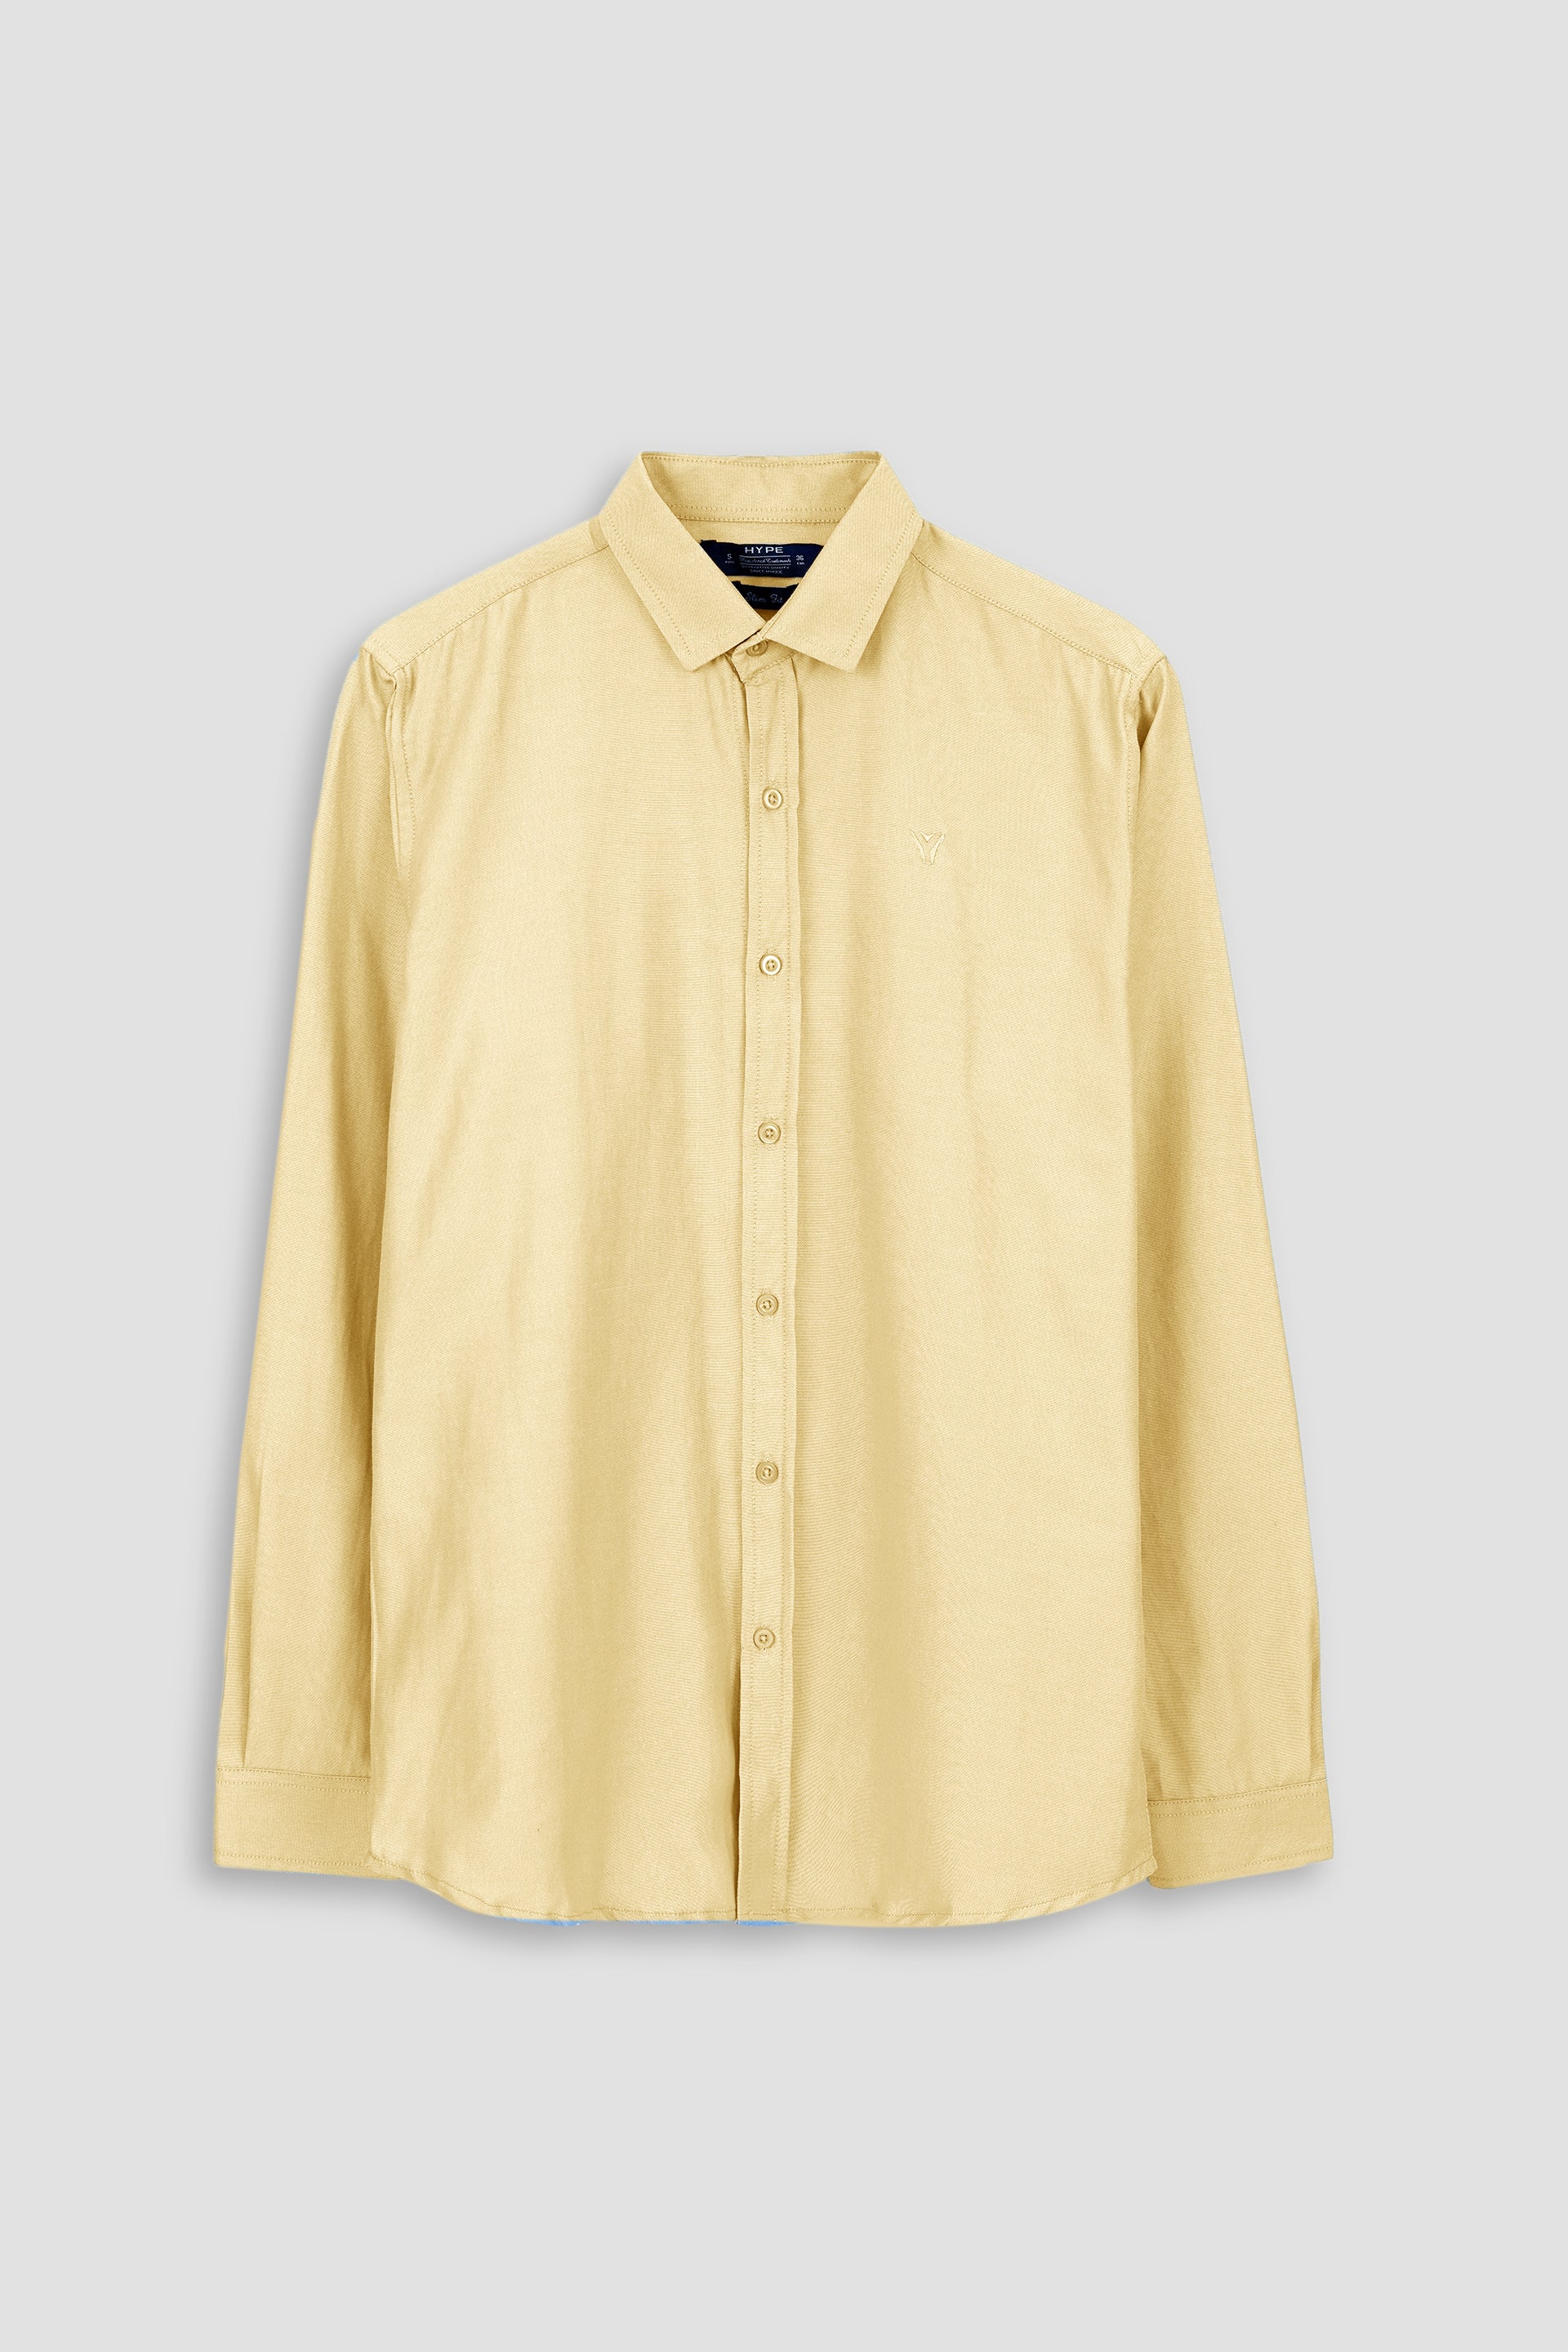 Embroidered Soft Cotton Yellow Casual Shirt 002364